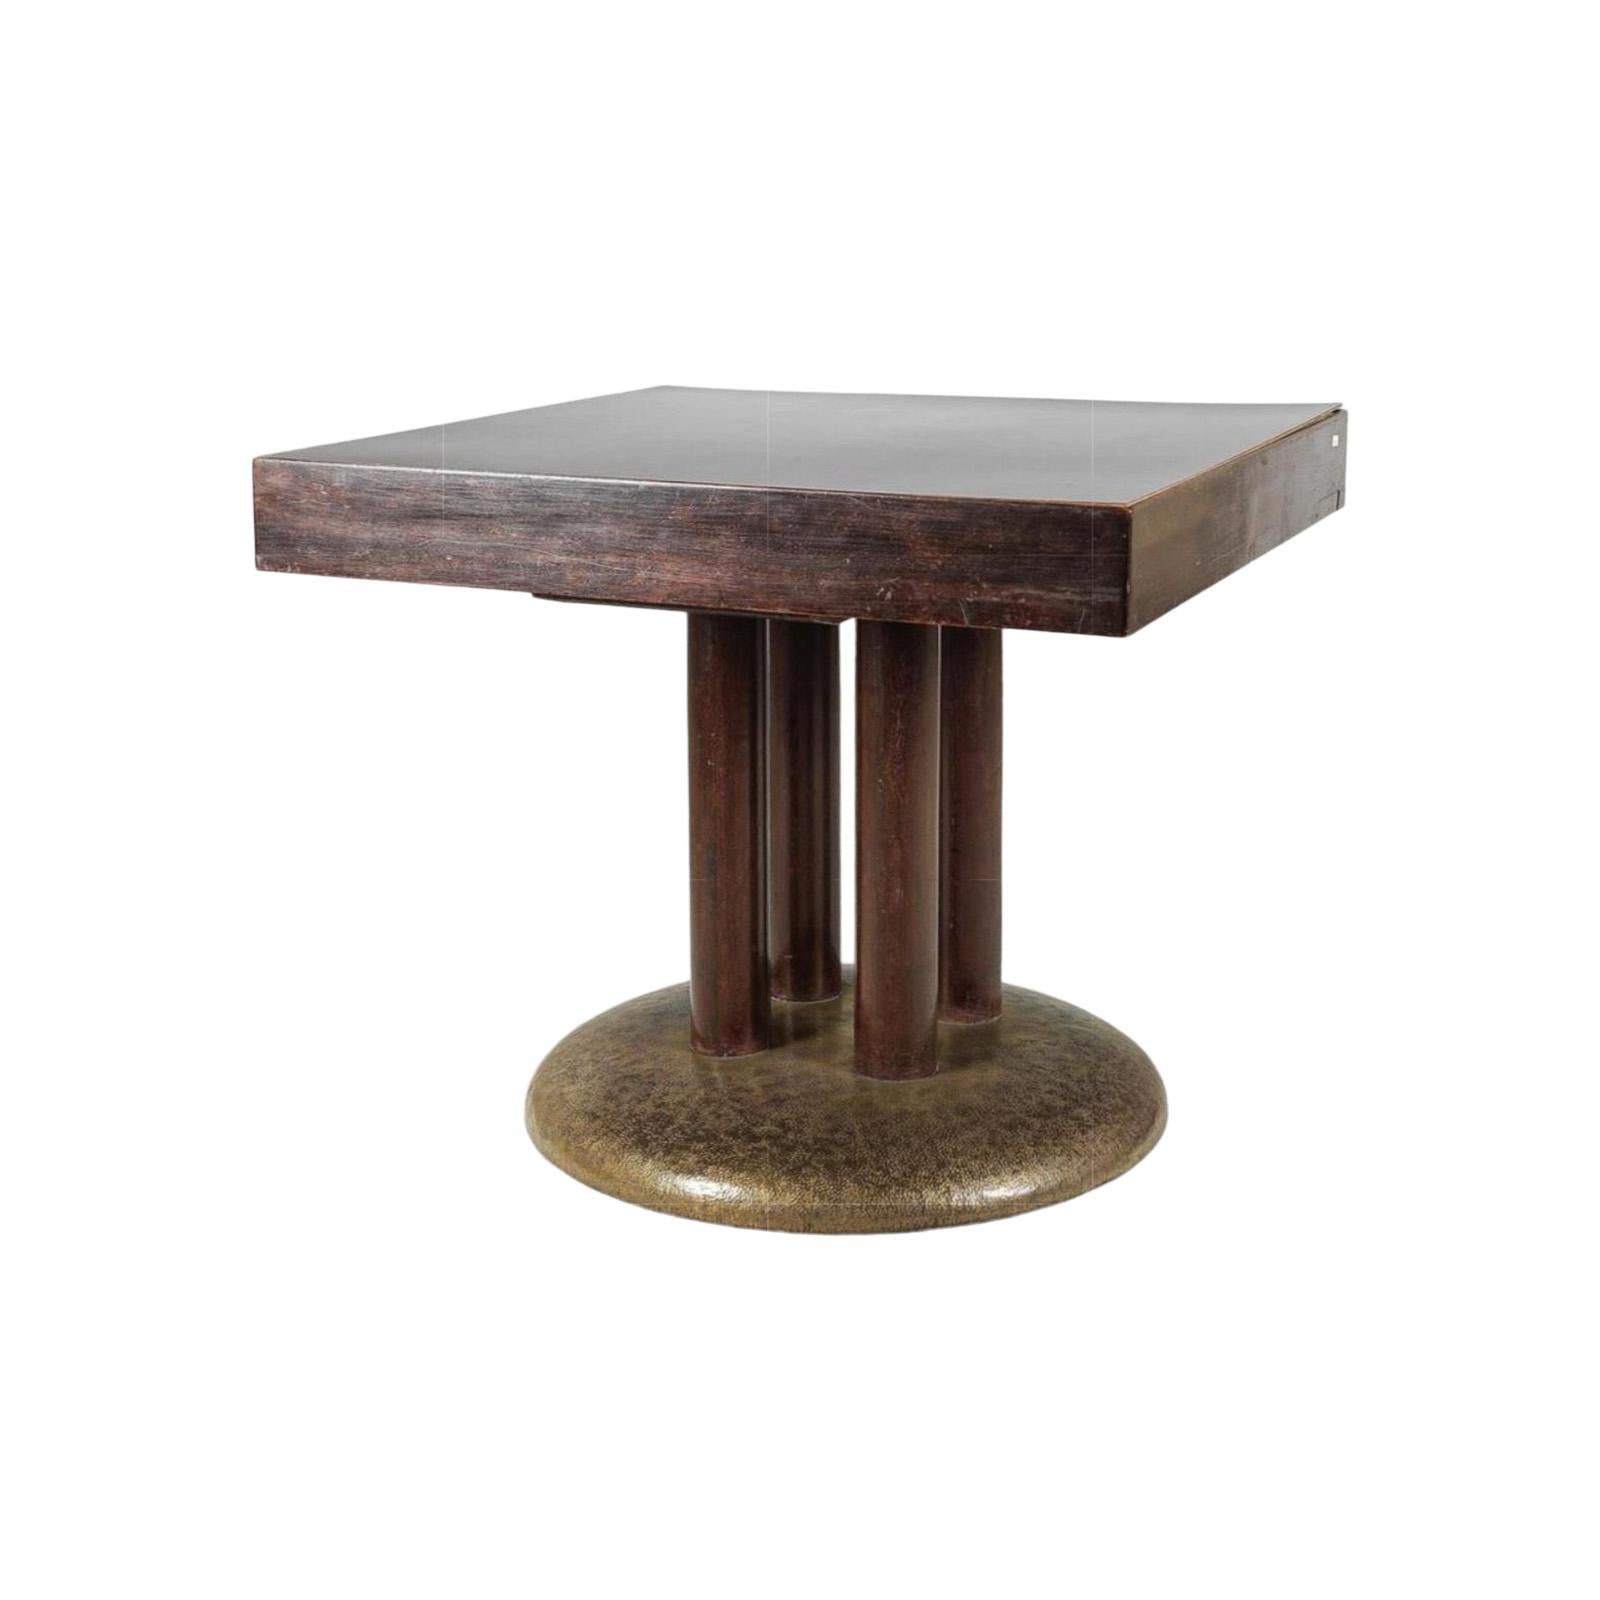 Beechwood stained, round brass-base, chased with Hammer-finish, four collumnar table-legs, on four corners extendible chips-bowls in brass - compare haberfeld table, knize tables.